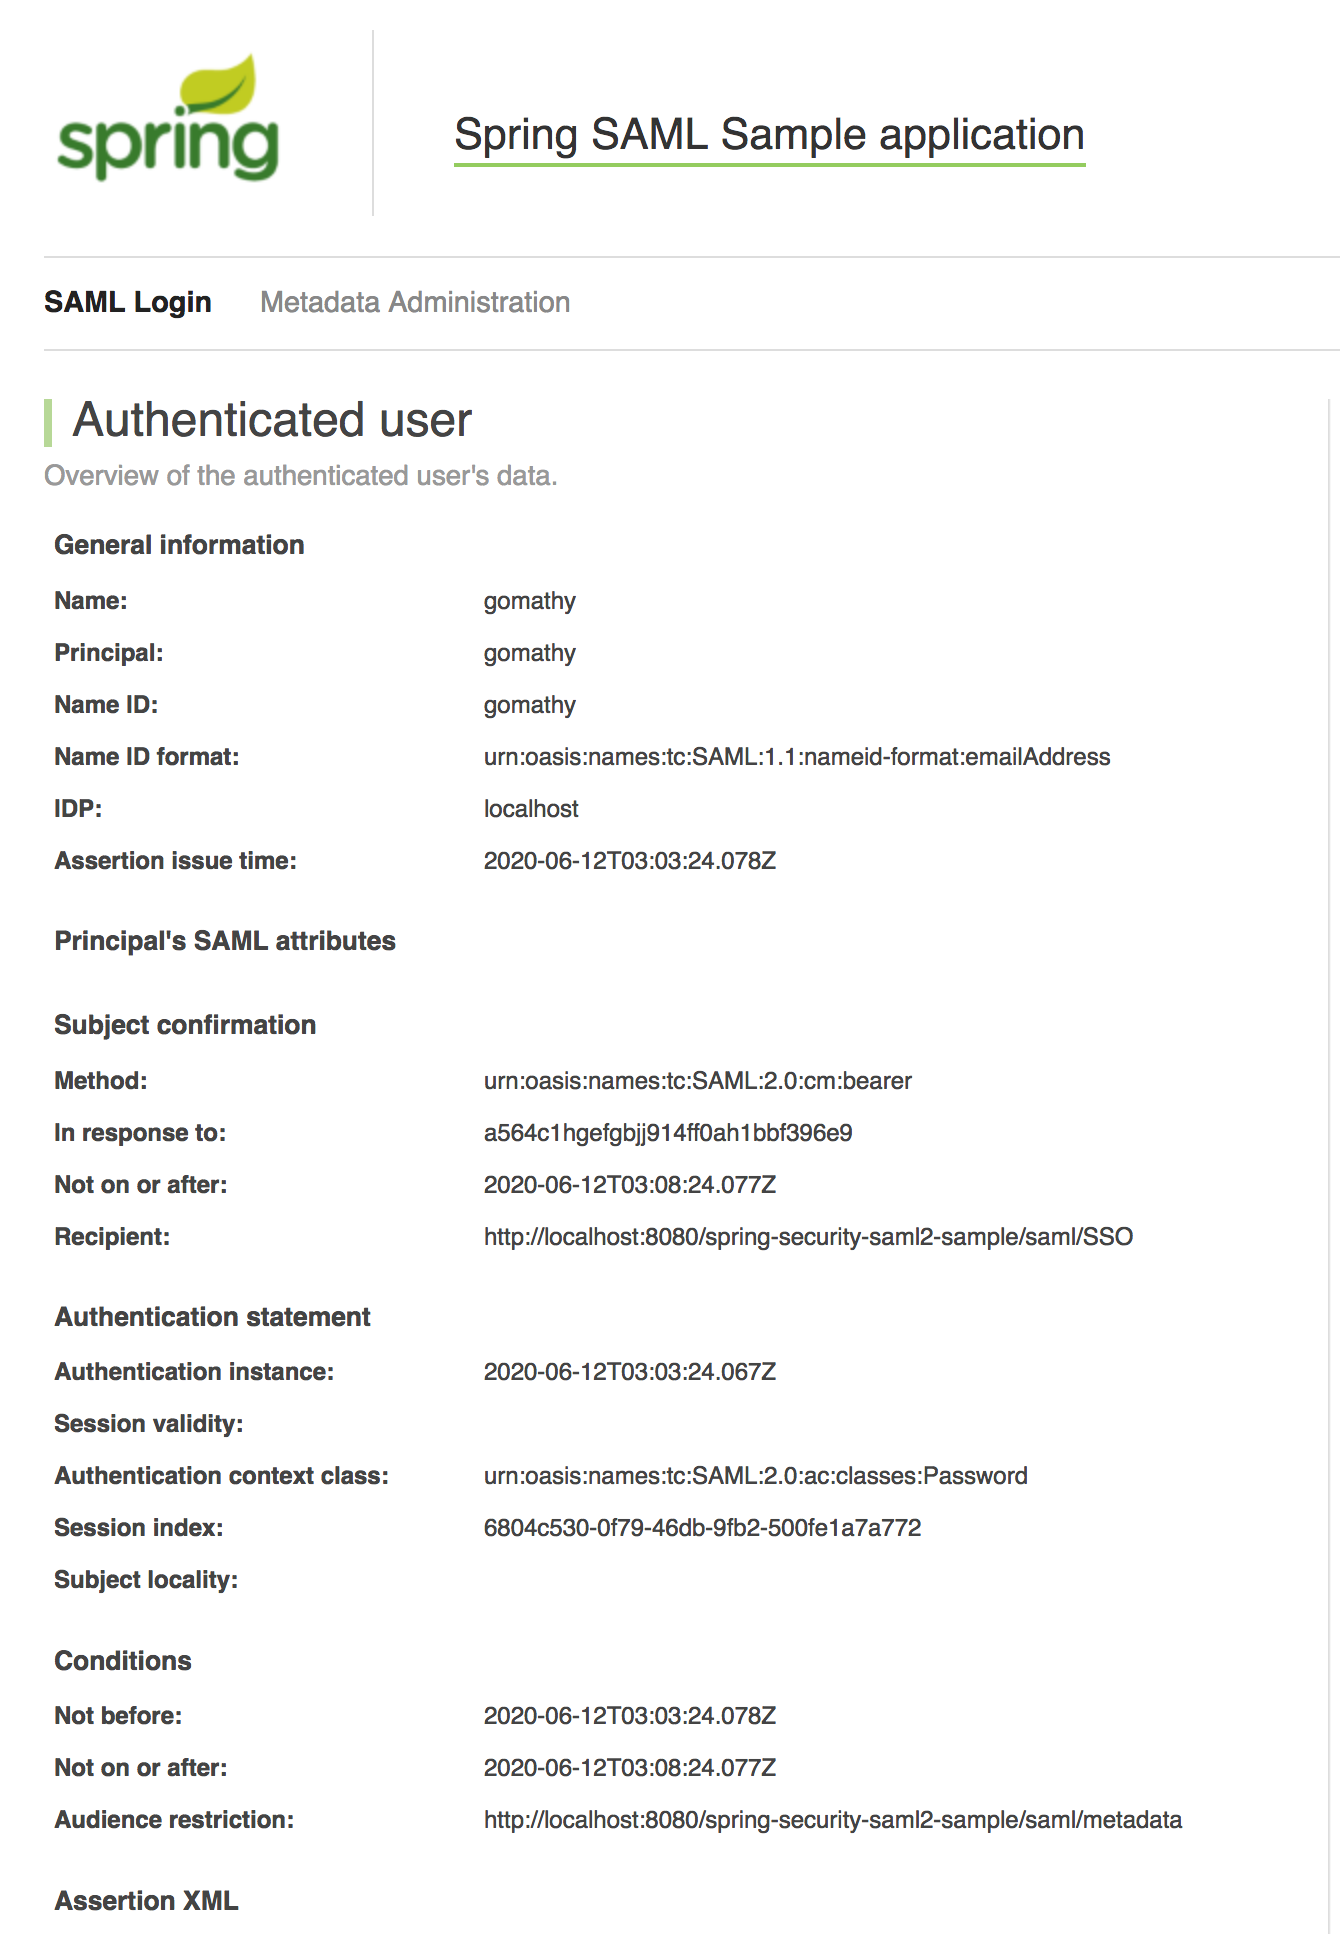 Authenticated user information